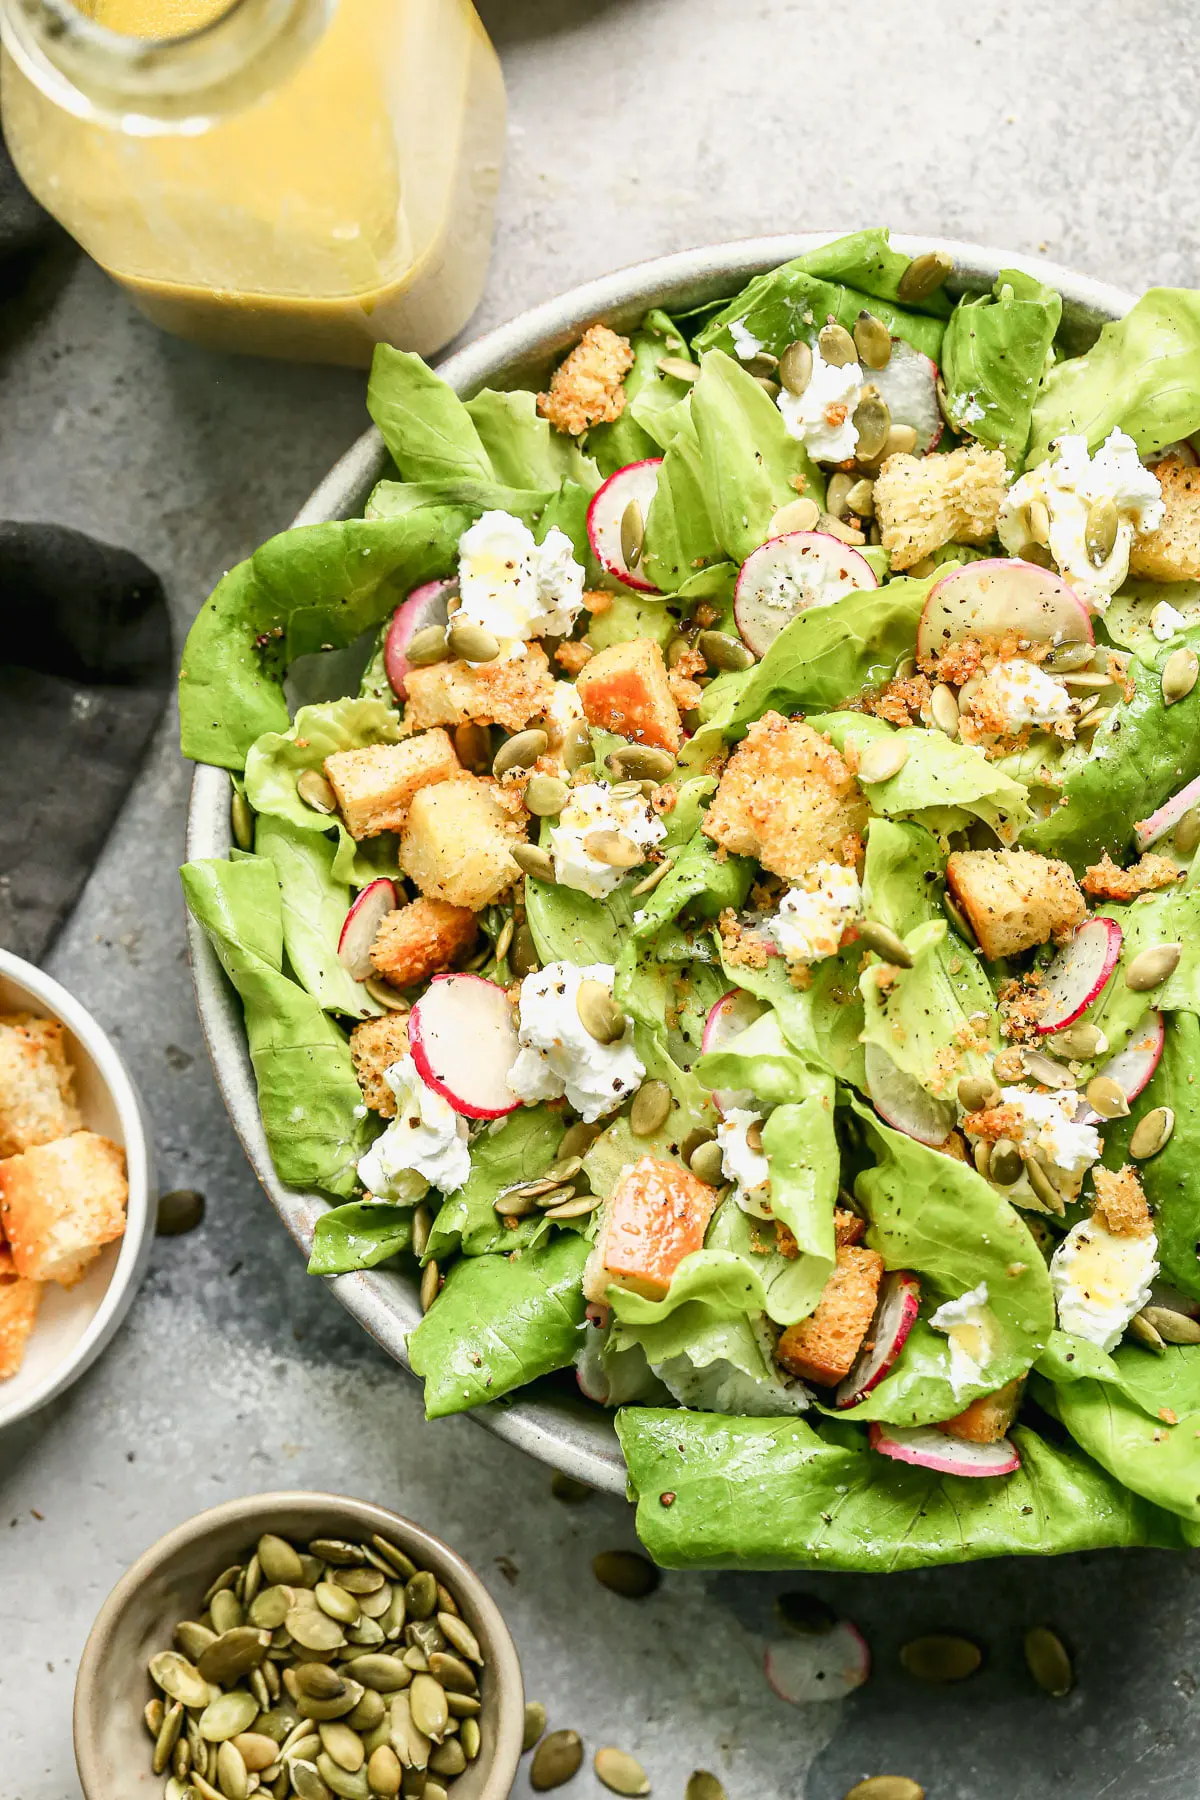 The most delicious Butter Lettuce Salad! Filled with creamy goat cheese, salty homemade croutons, radish, and pepiista seeds. Super easy and goes with everything! 